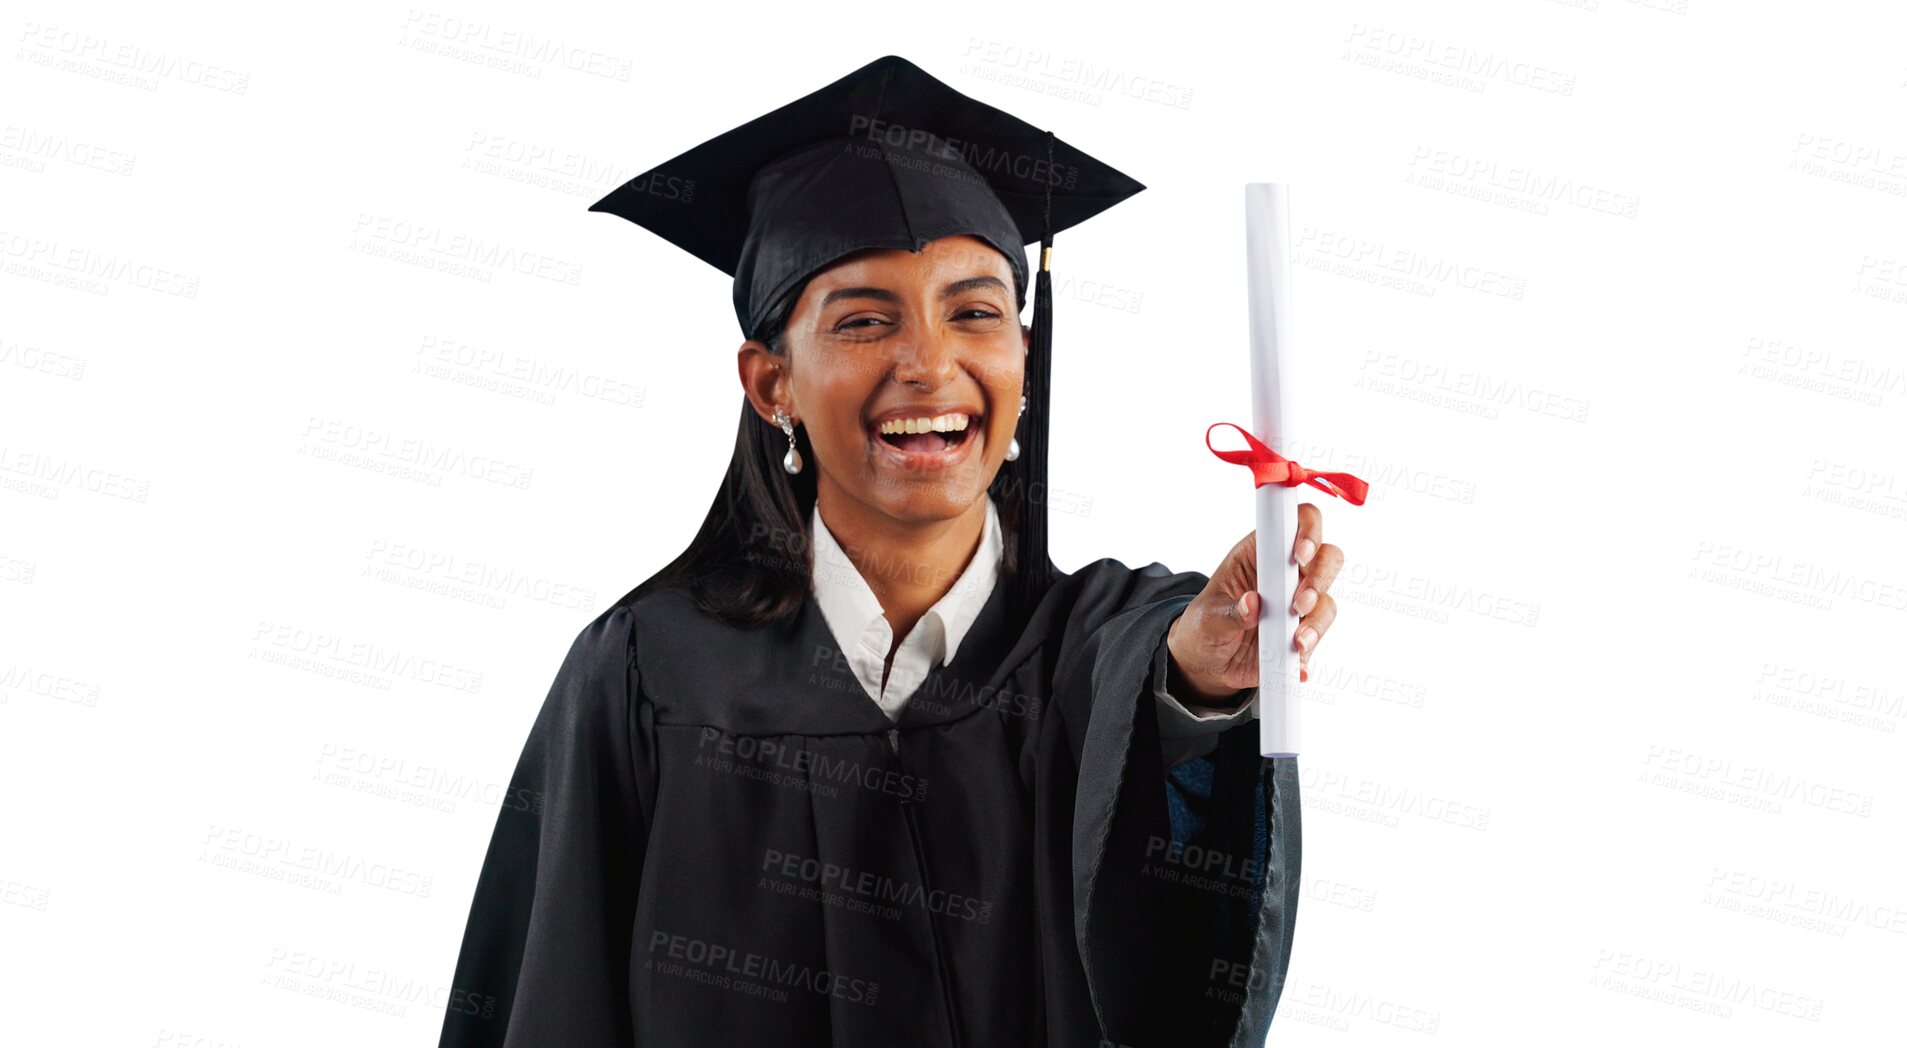 Buy stock photo Graduation success, certificate or portrait of student with education, college or university goal. Indian woman, happy or proud graduate excited by achievement isolated transparent png background